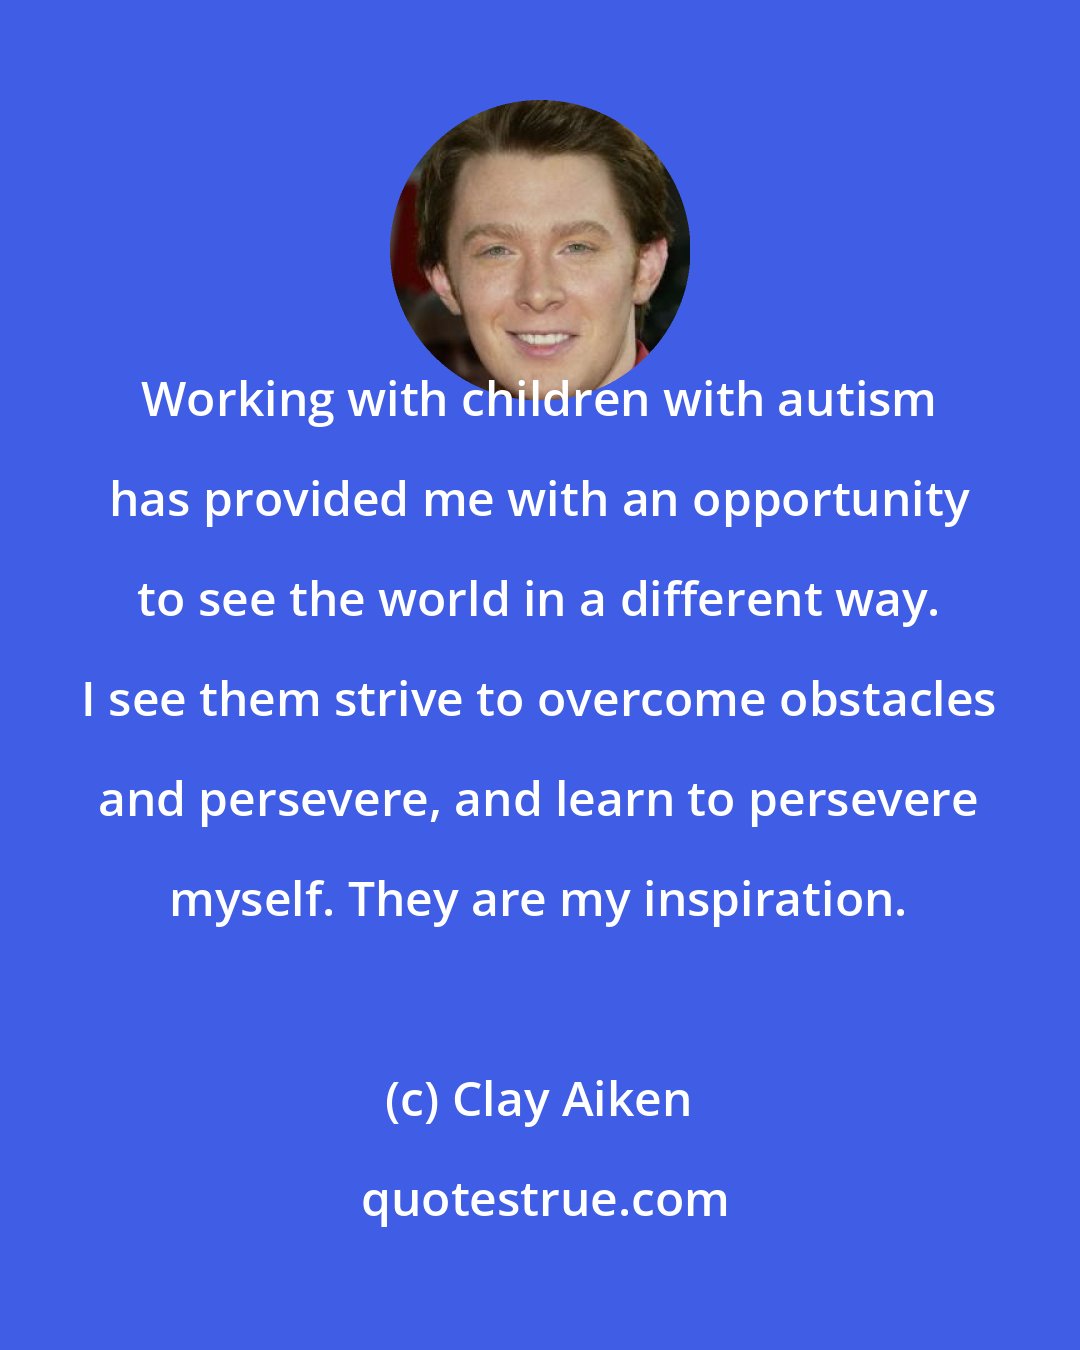 Clay Aiken: Working with children with autism has provided me with an opportunity to see the world in a different way. I see them strive to overcome obstacles and persevere, and learn to persevere myself. They are my inspiration.